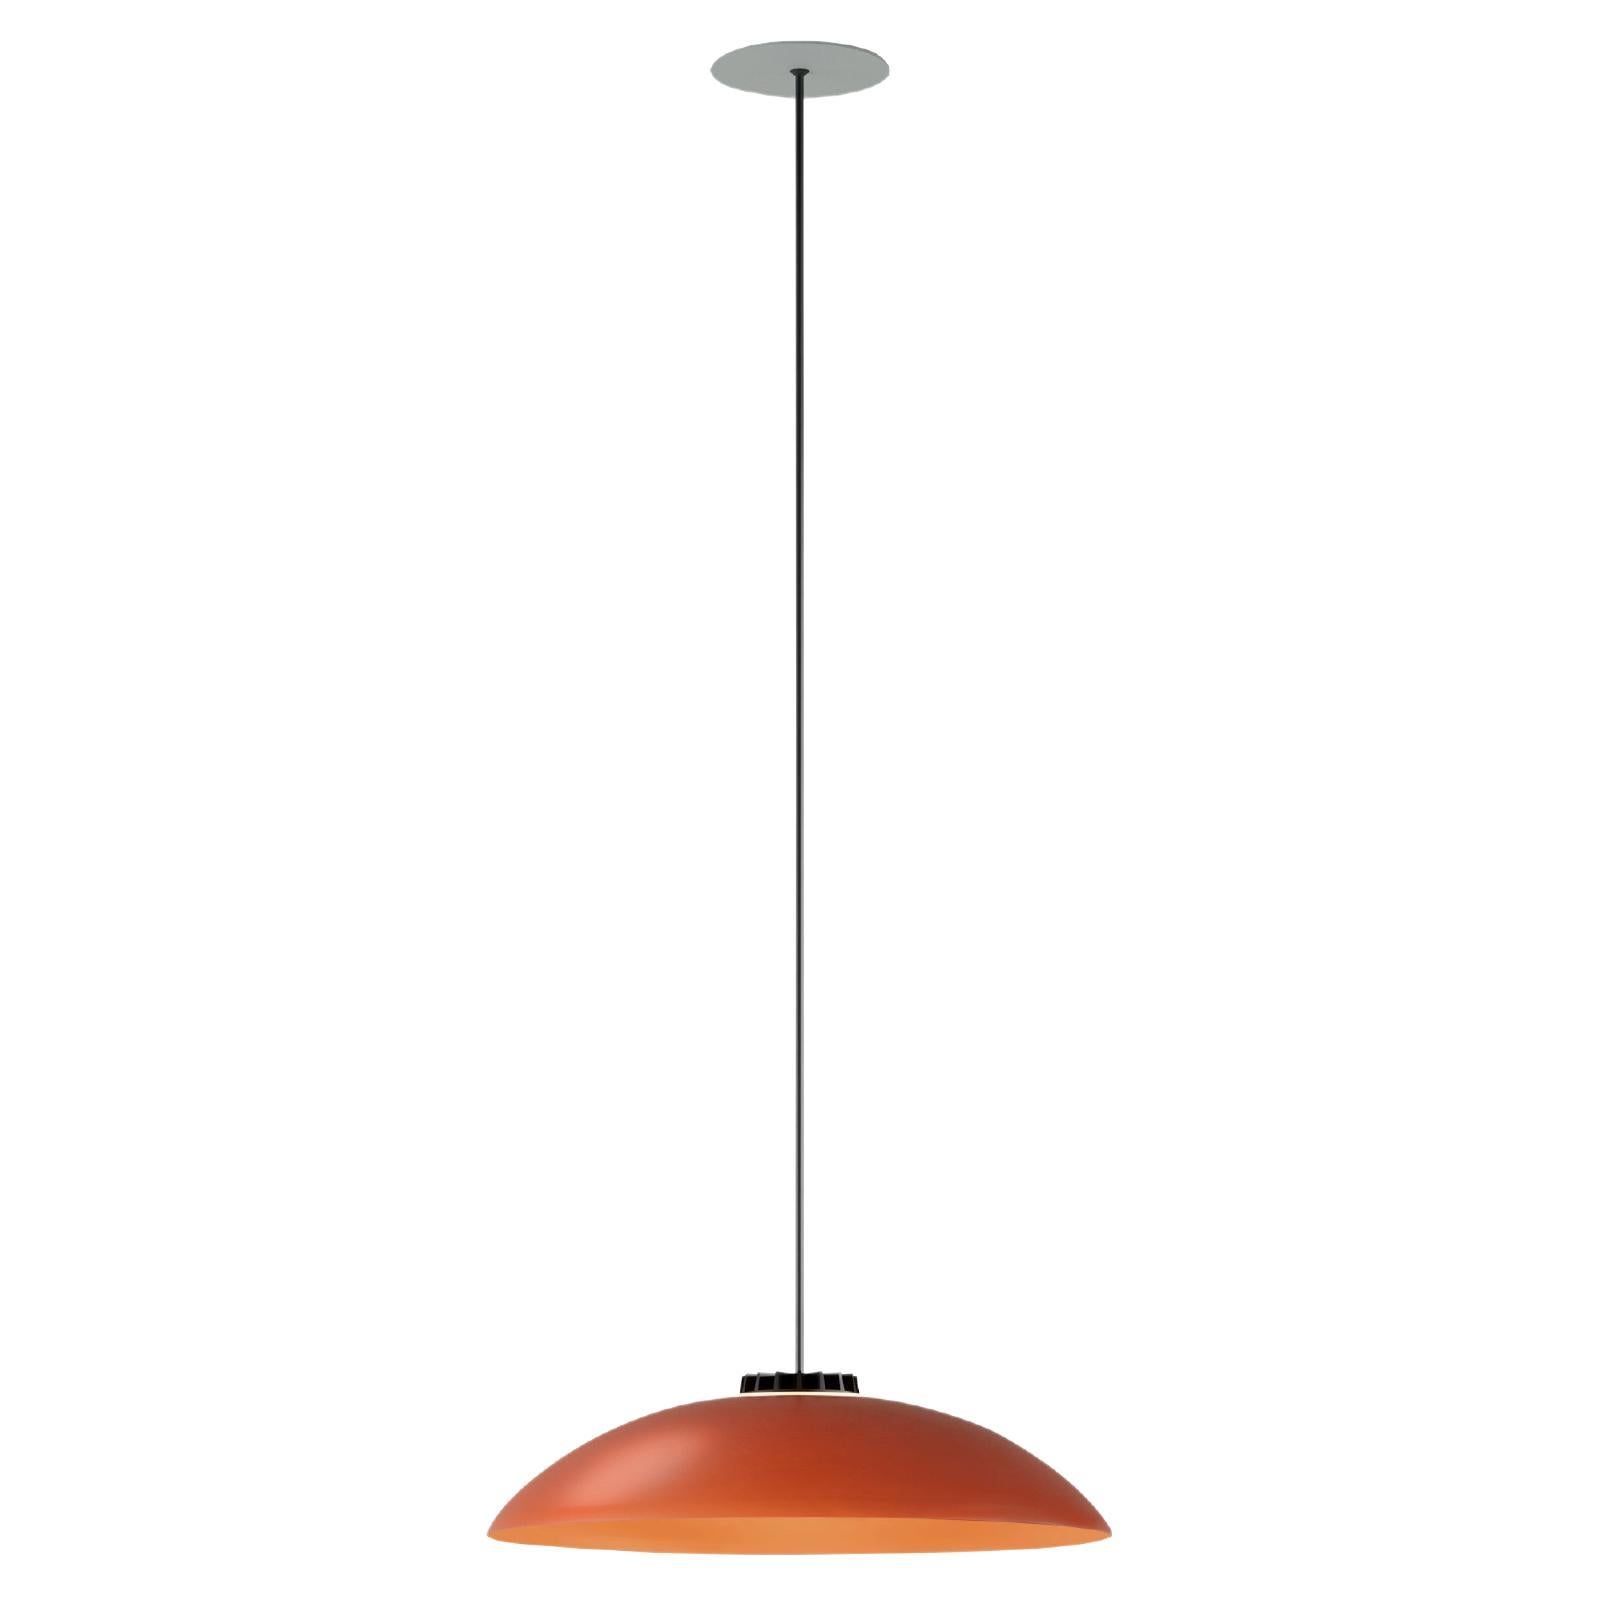 Small Red Headhat Plate Pendant Lamp by Santa & Cole